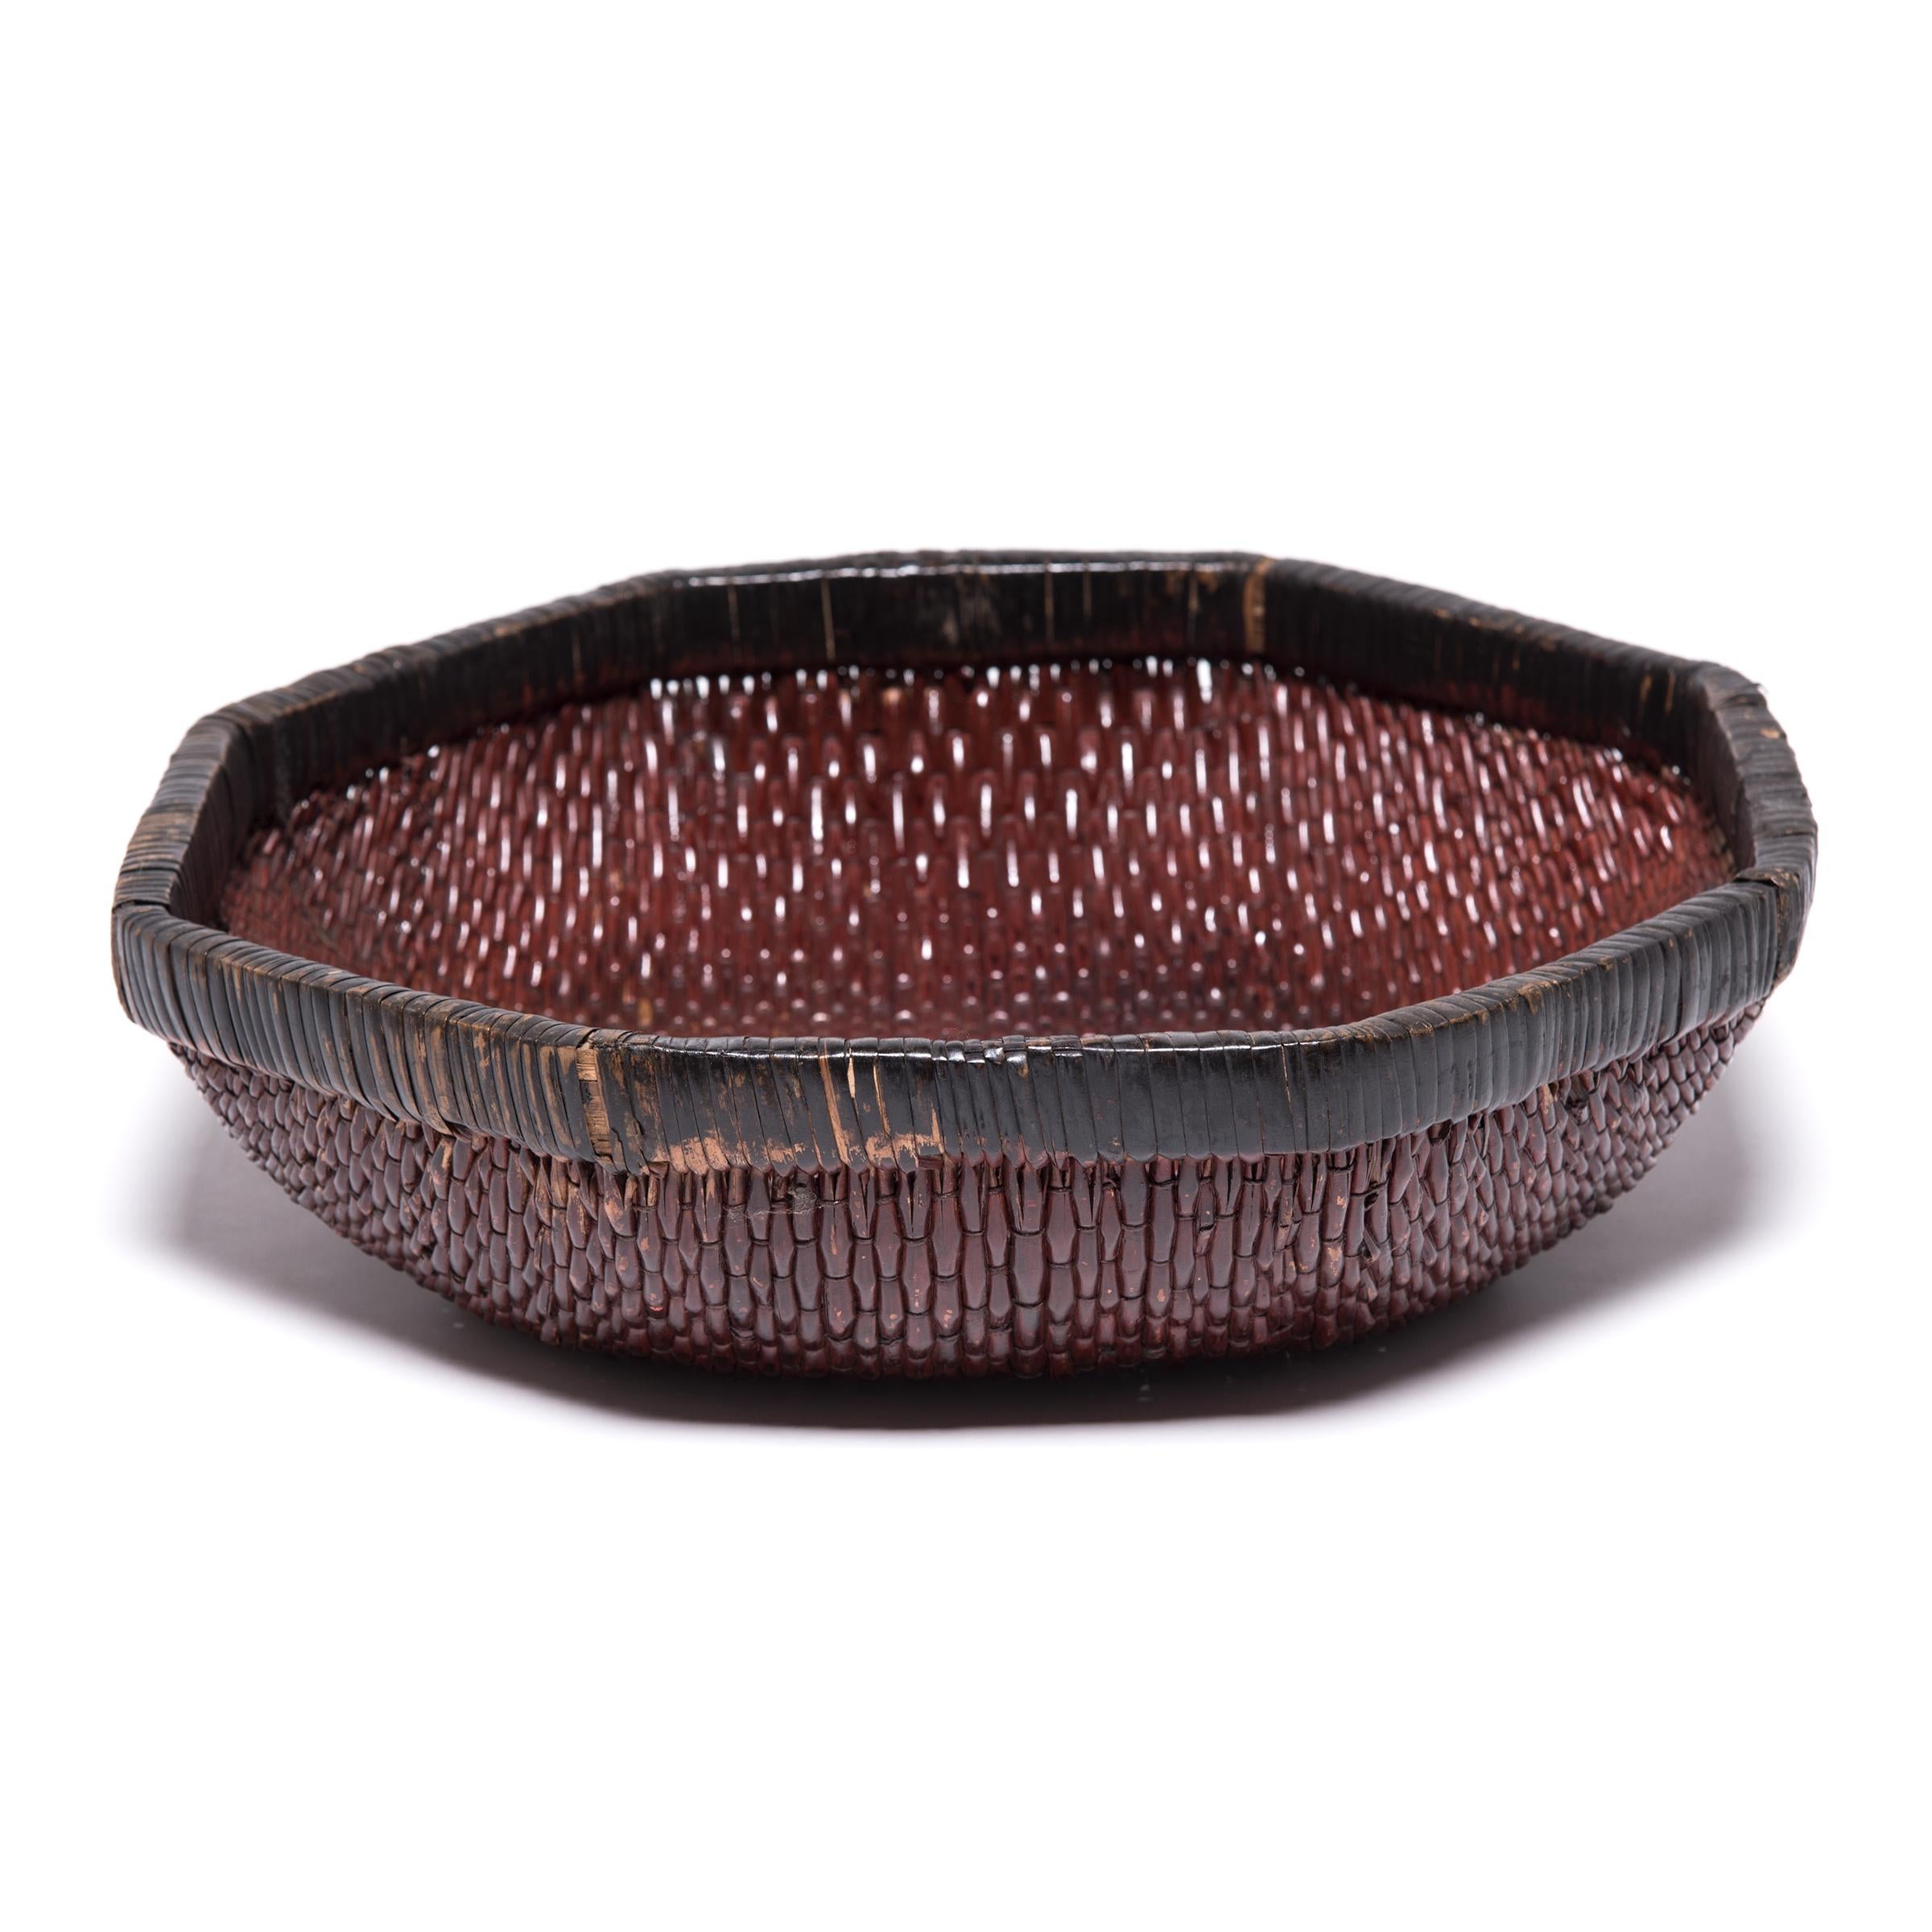 Lacquered Chinese Woven Field Basket, circa 1900